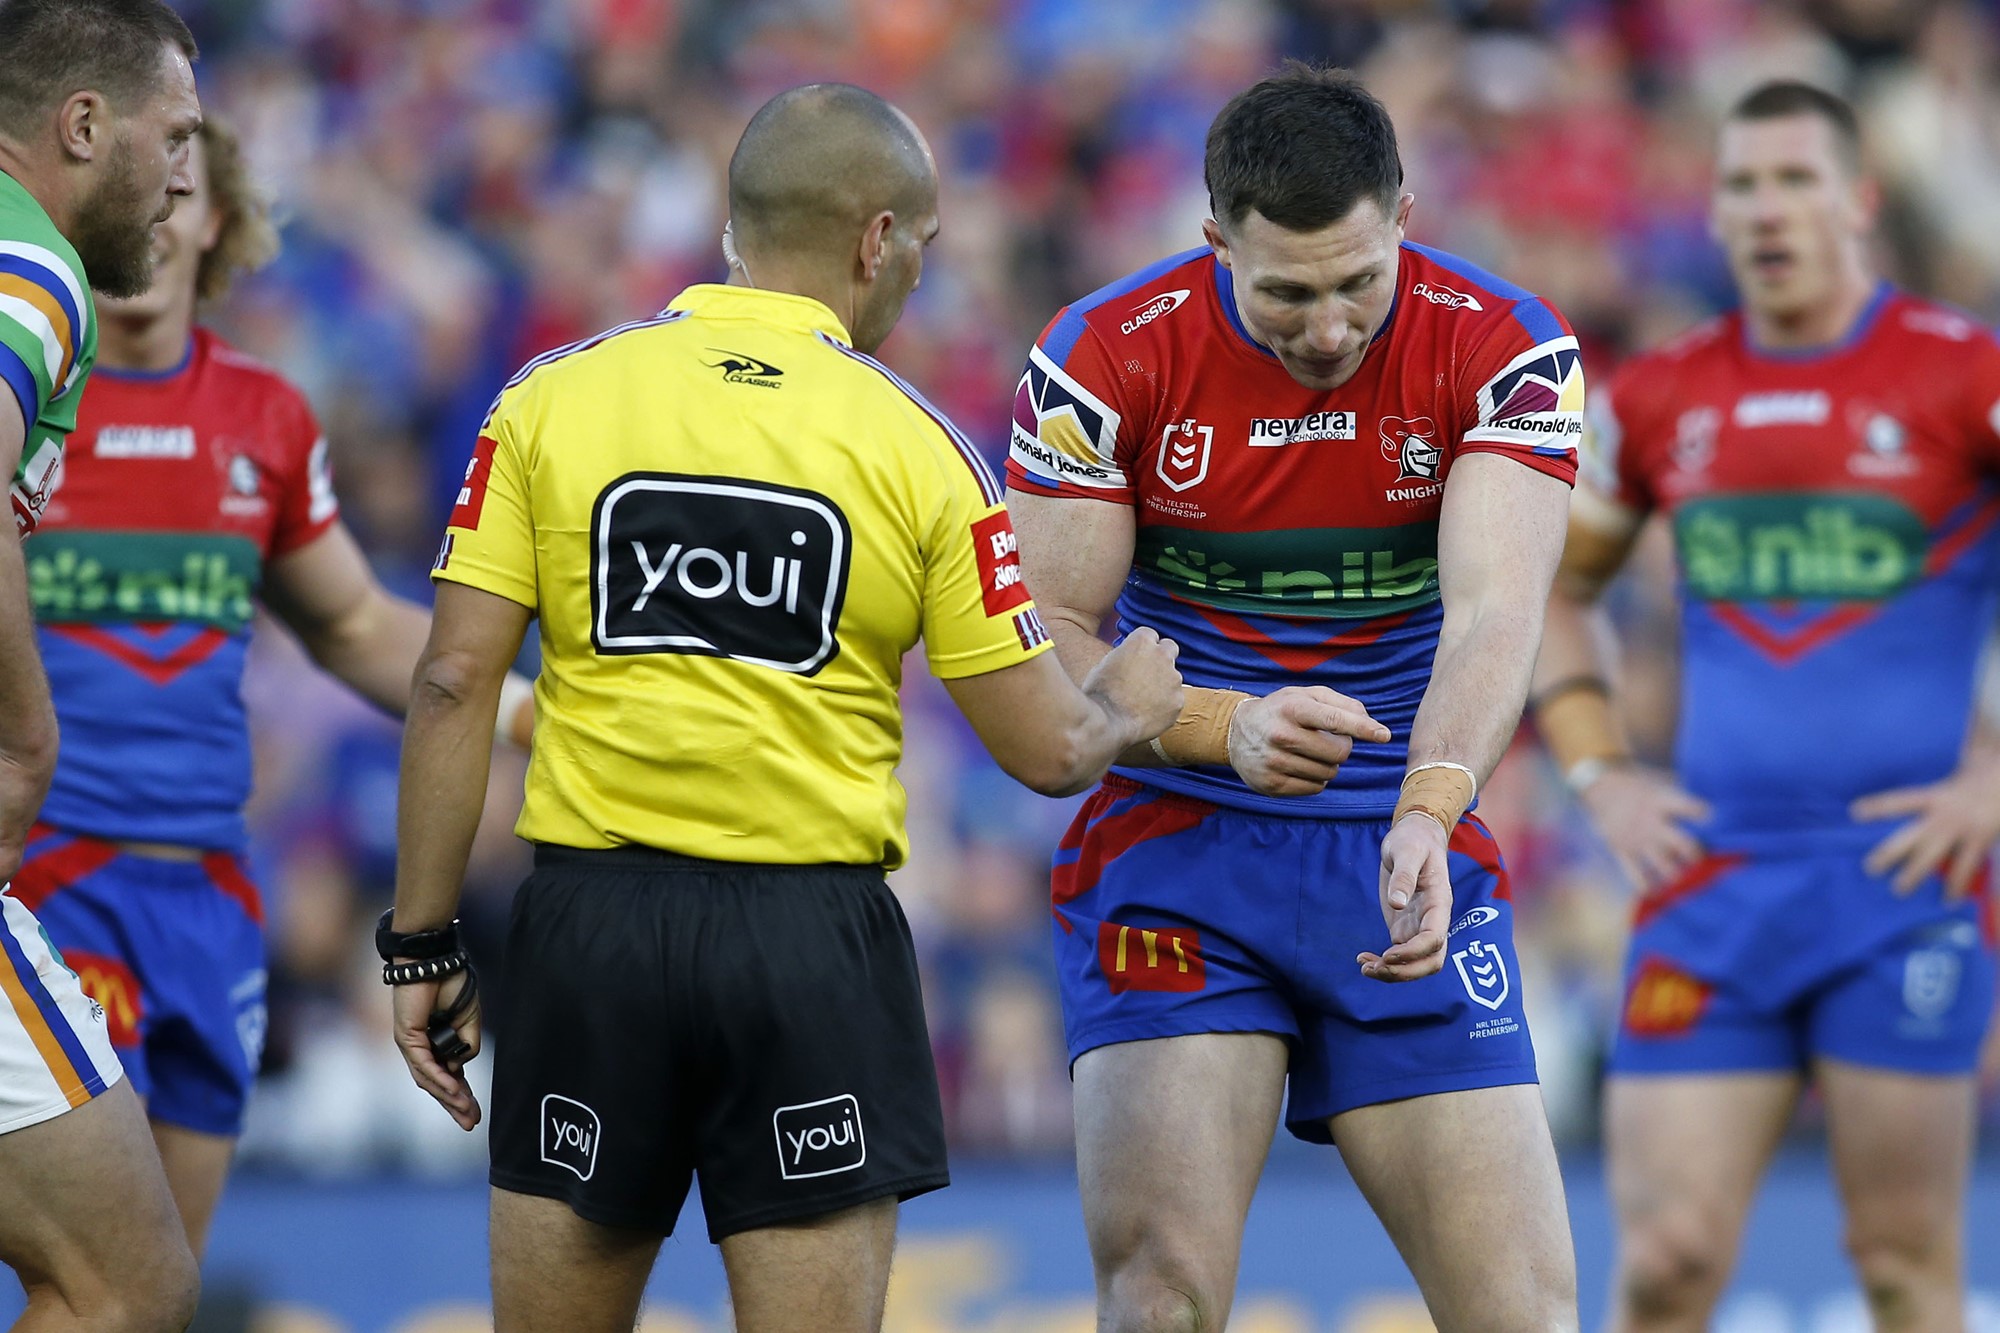 Newcastle Knights win extra-time thriller as Canberra Raiders Jack Wighton reported for biting in NRL elimination final